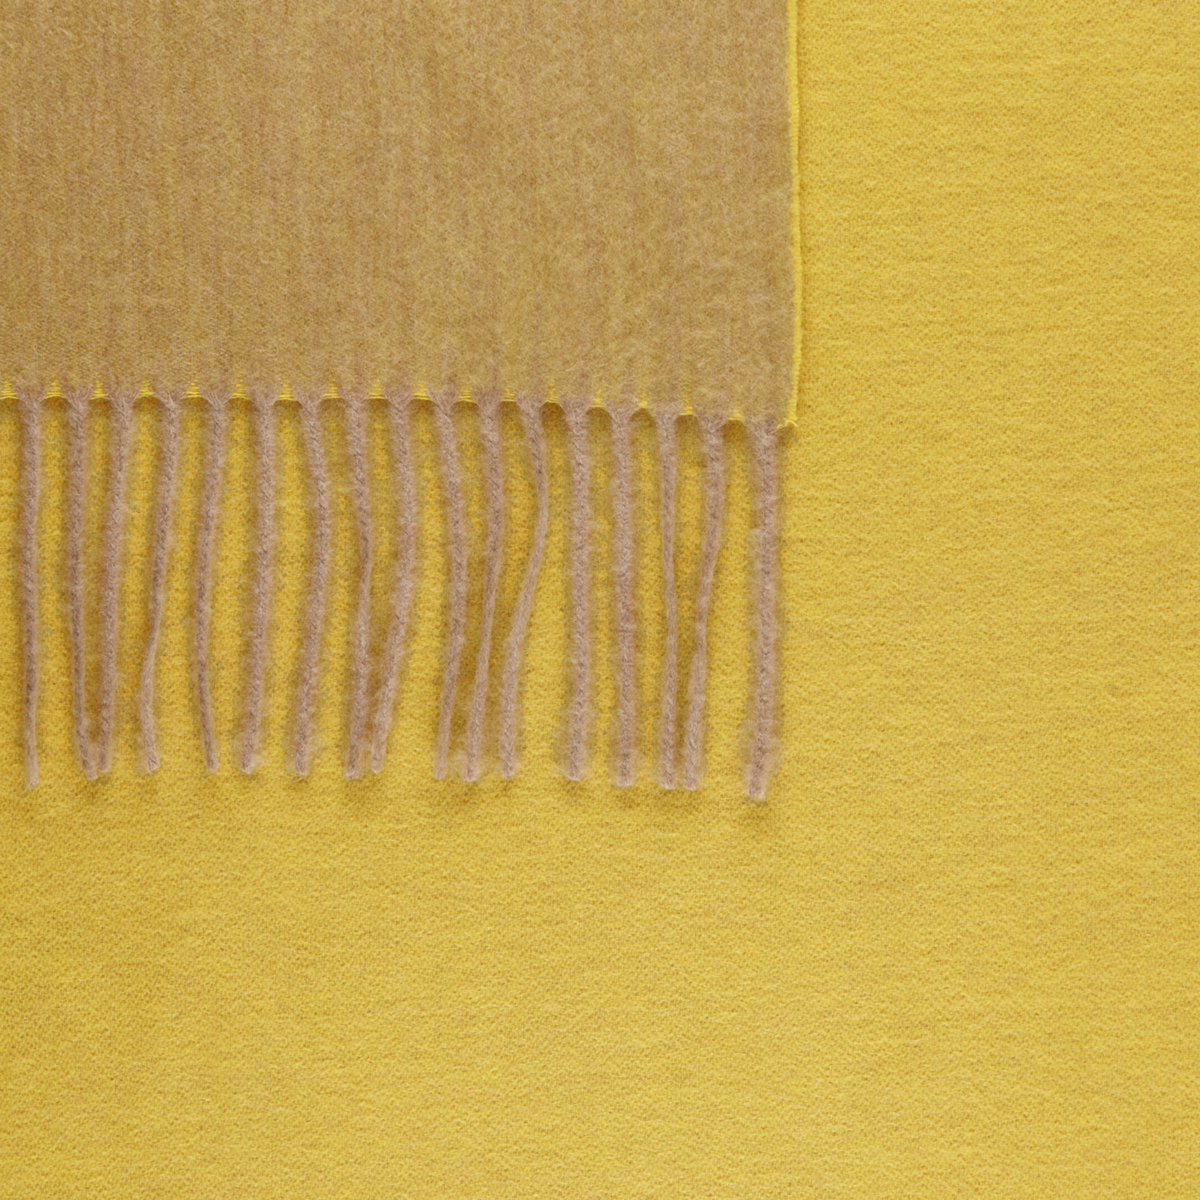 Swatch Sample of Matouk Paley Throws in Yellow/Natural Color